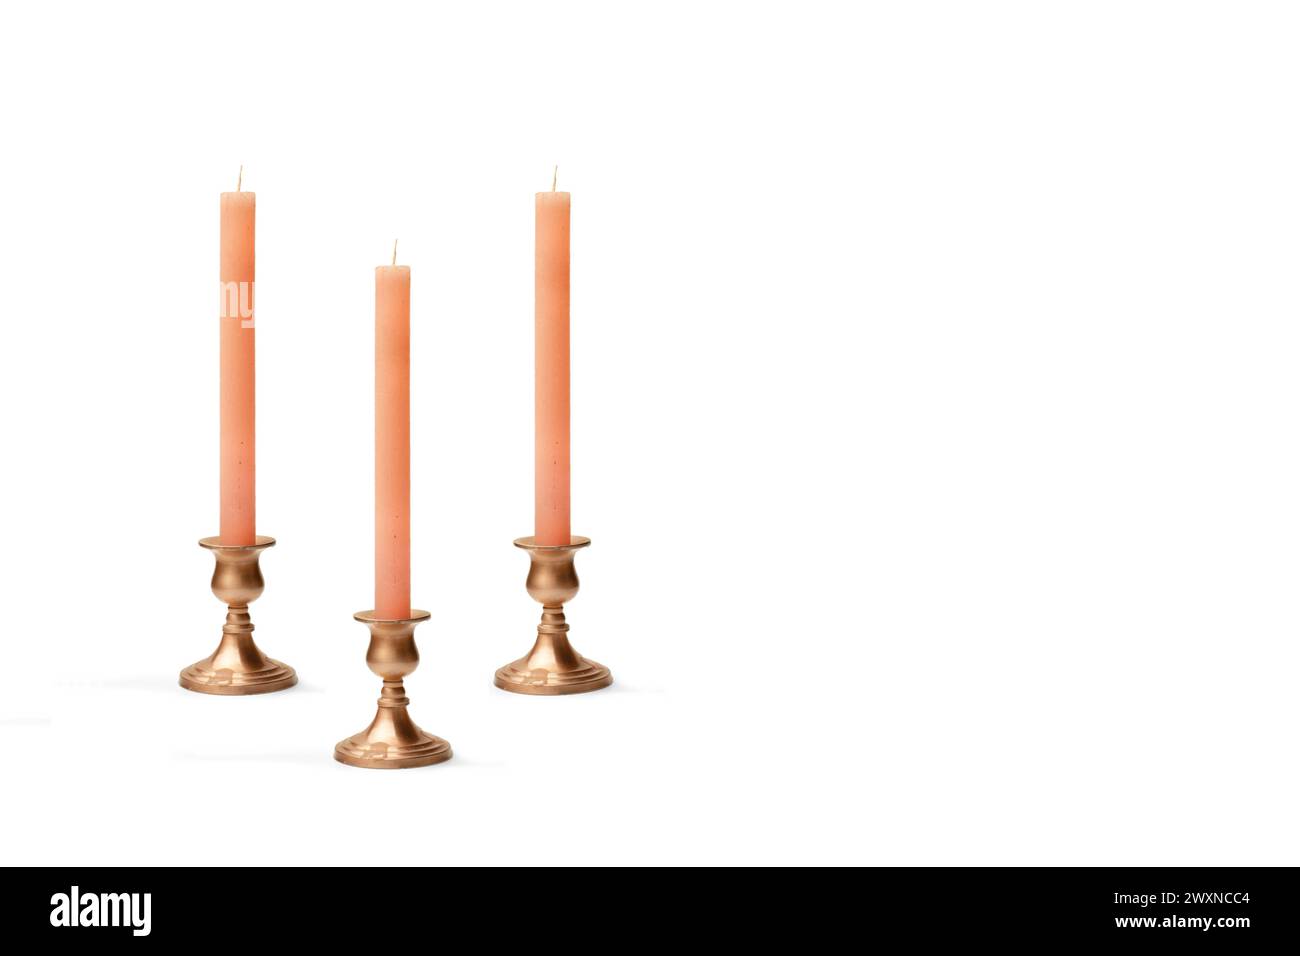 Three copper chandeliers with pink candles on a white background with copy space Stock Photo